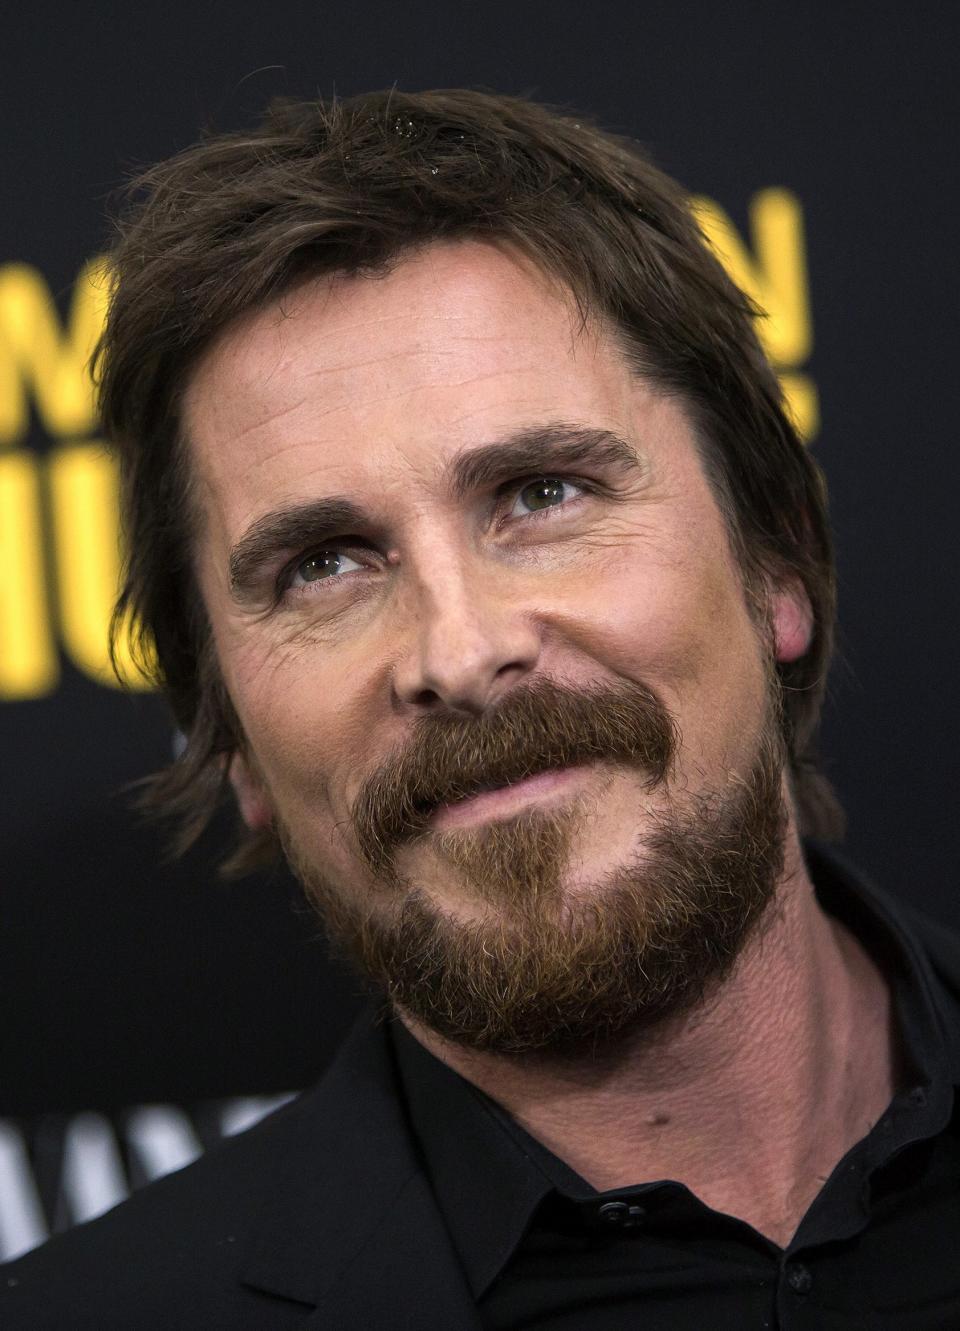 File of actor Christian Bale attending the 'American Hustle' premiere in New York